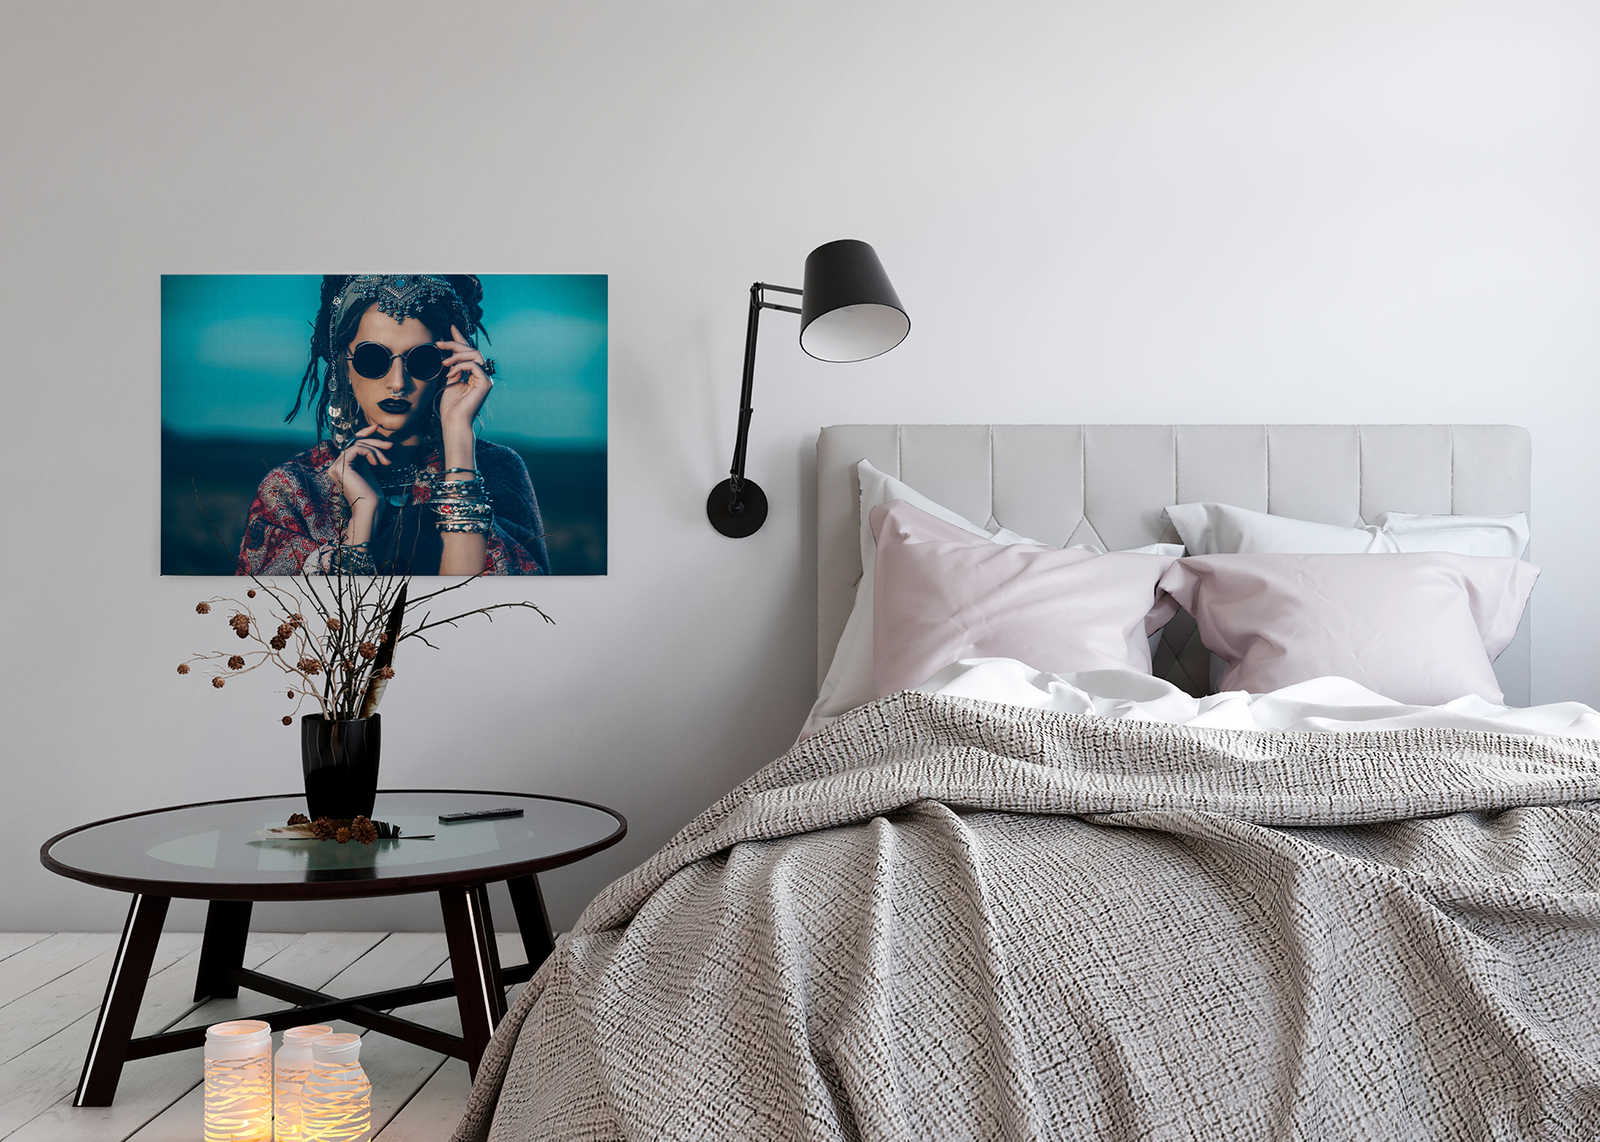             La bohème 1 - Canvas painting with woman in boho style on natural linen structure - 0.90 m x 0.60 m
        